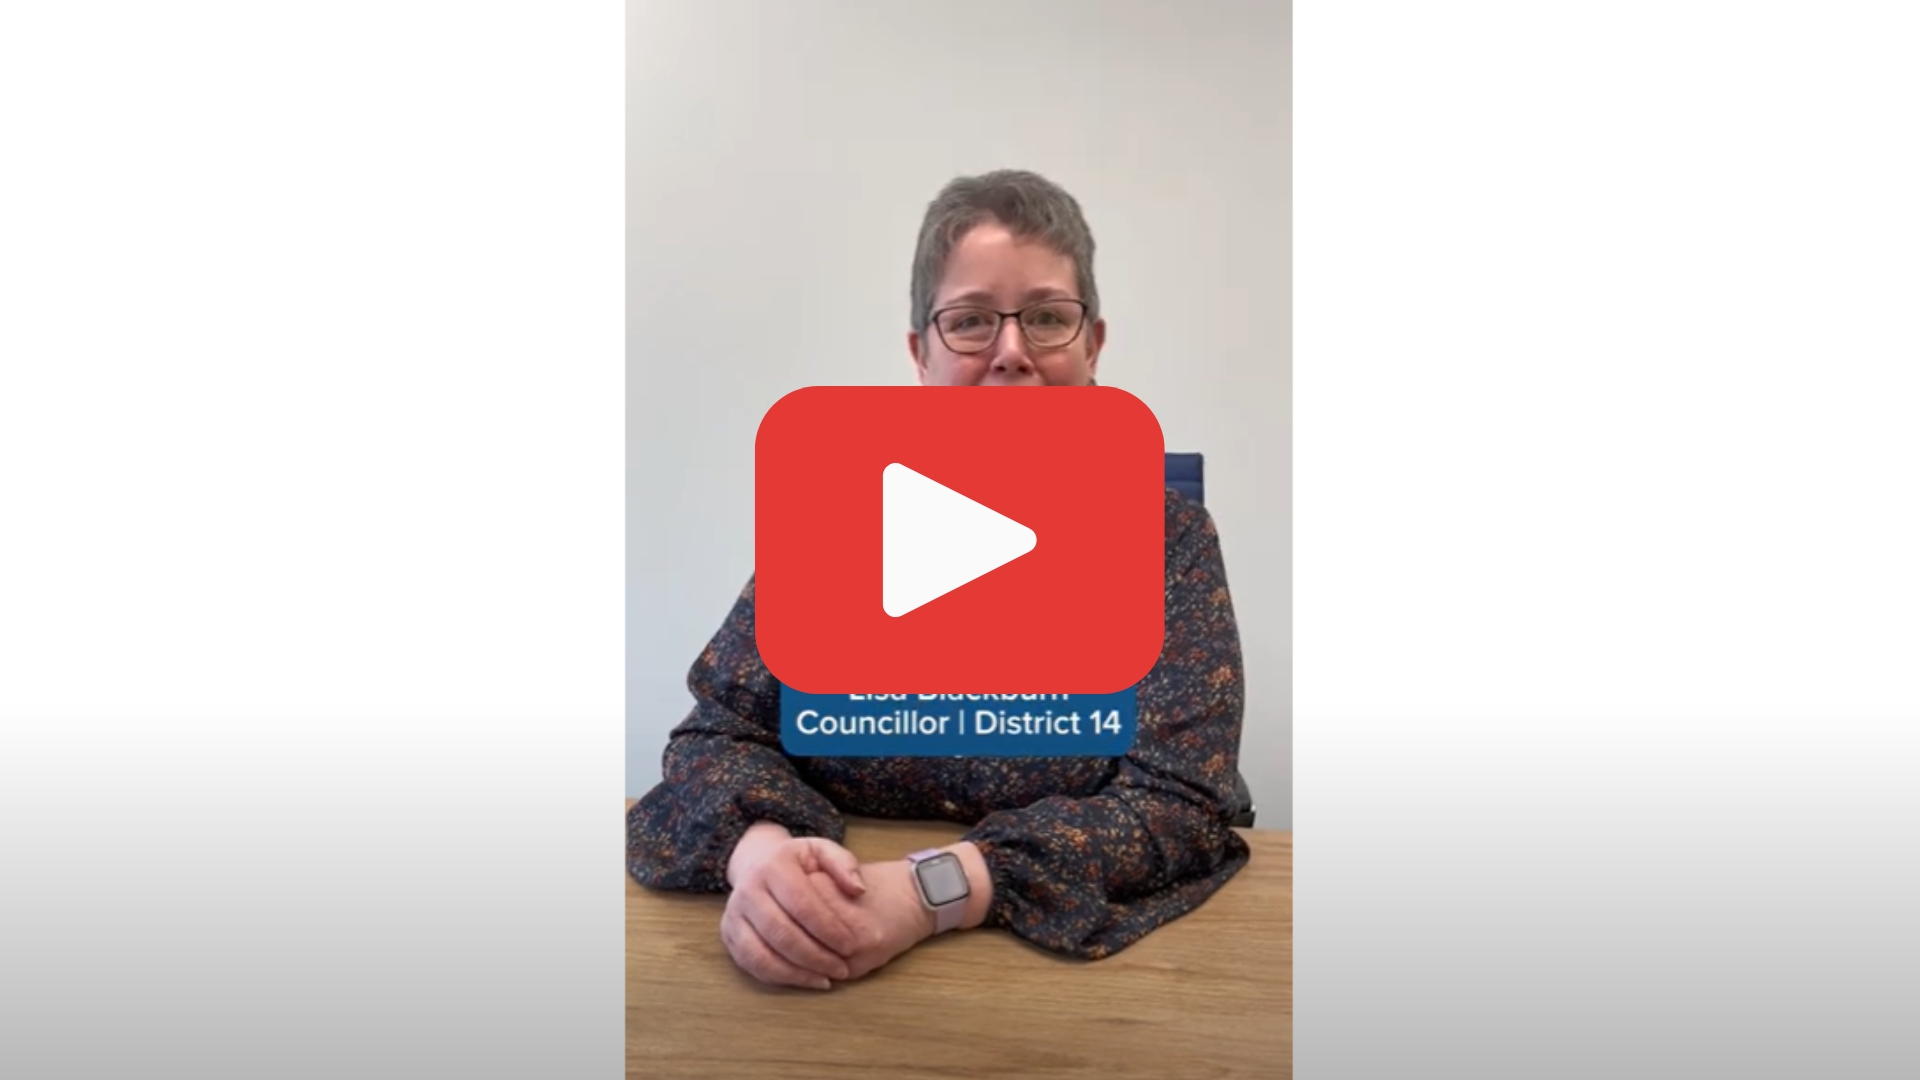 Video screenshot of Councillor Lisa Blackburn sitting at a desk with a YouTube "play button" superimposed on her.